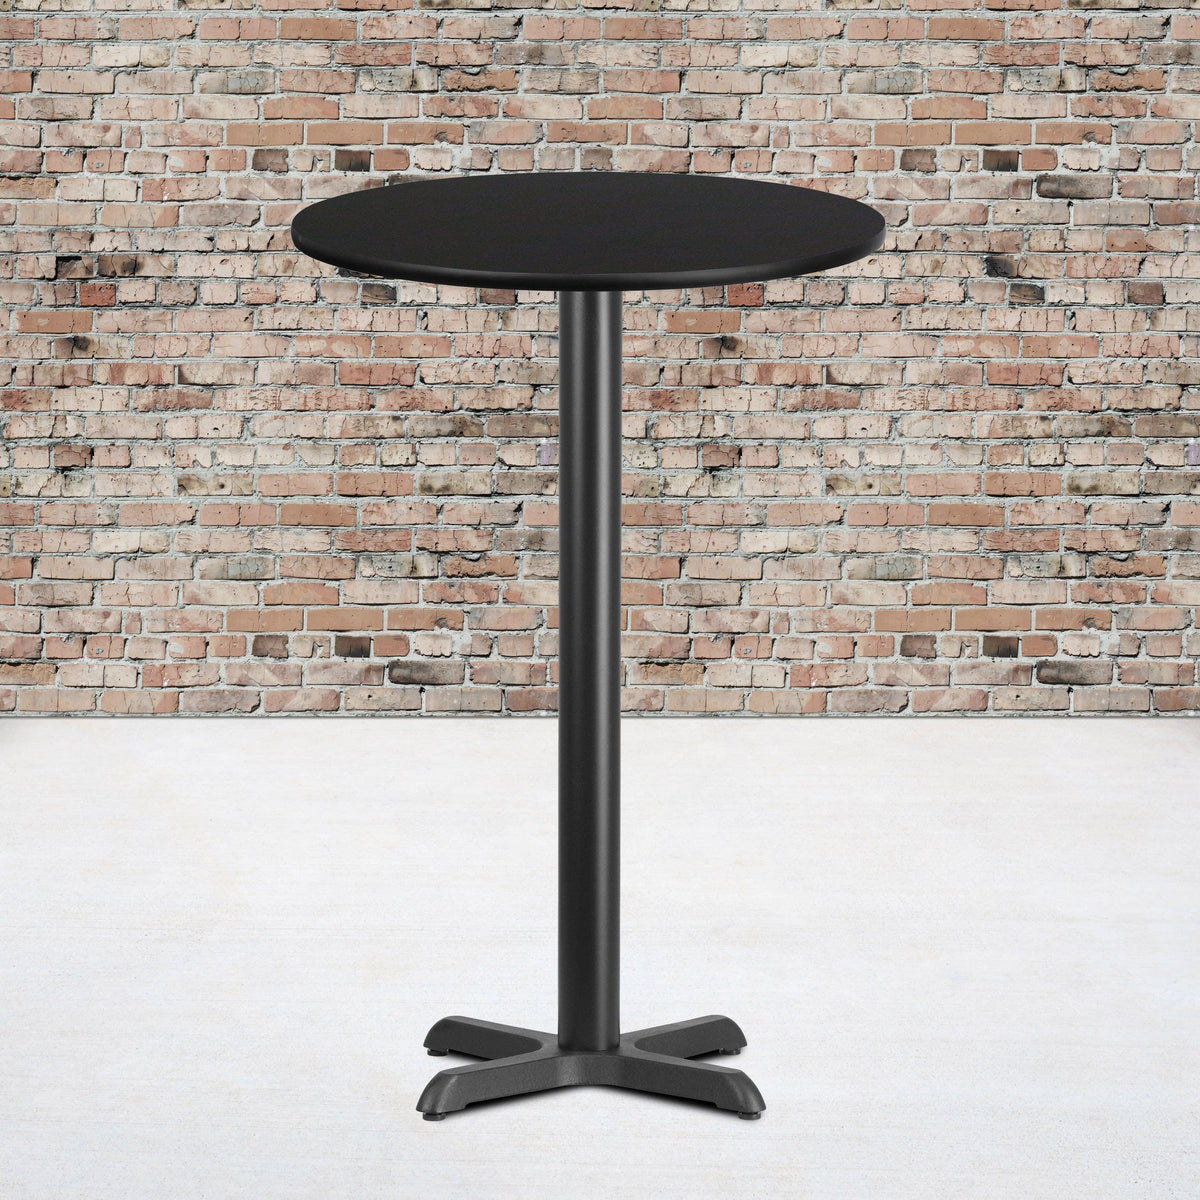 Black |#| 24inch Round Black Laminate Table Top with 22inch x 22inch Bar Height Table Base